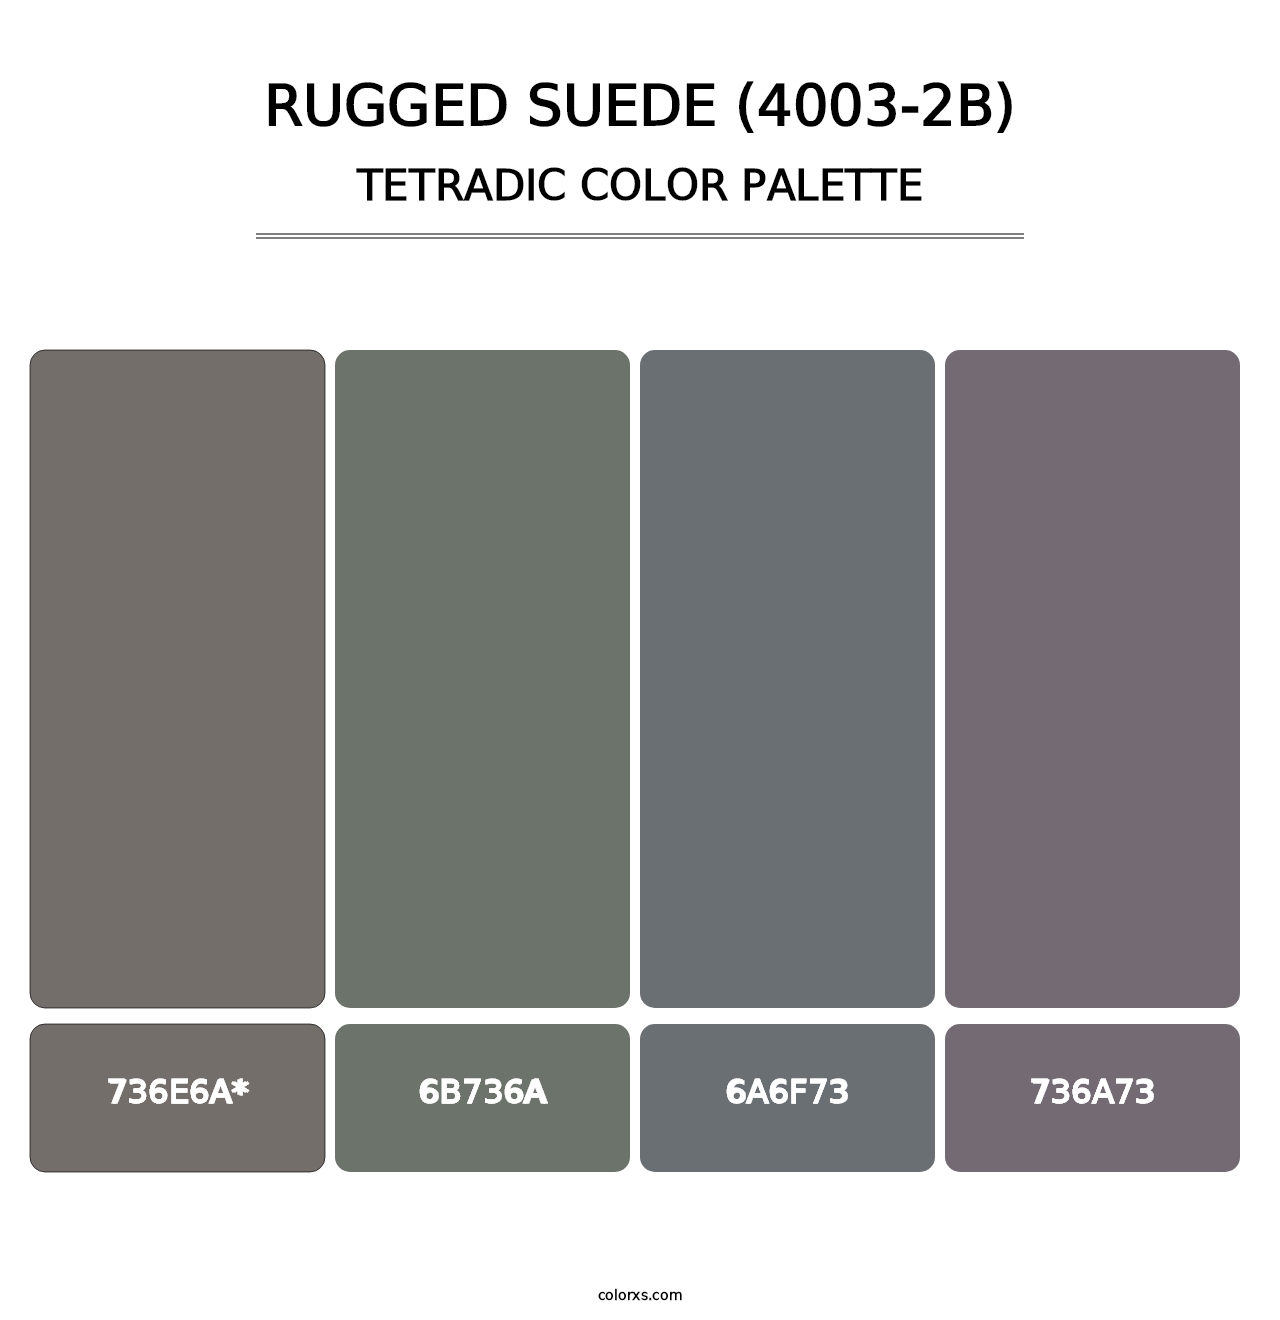 Rugged Suede (4003-2B) - Tetradic Color Palette